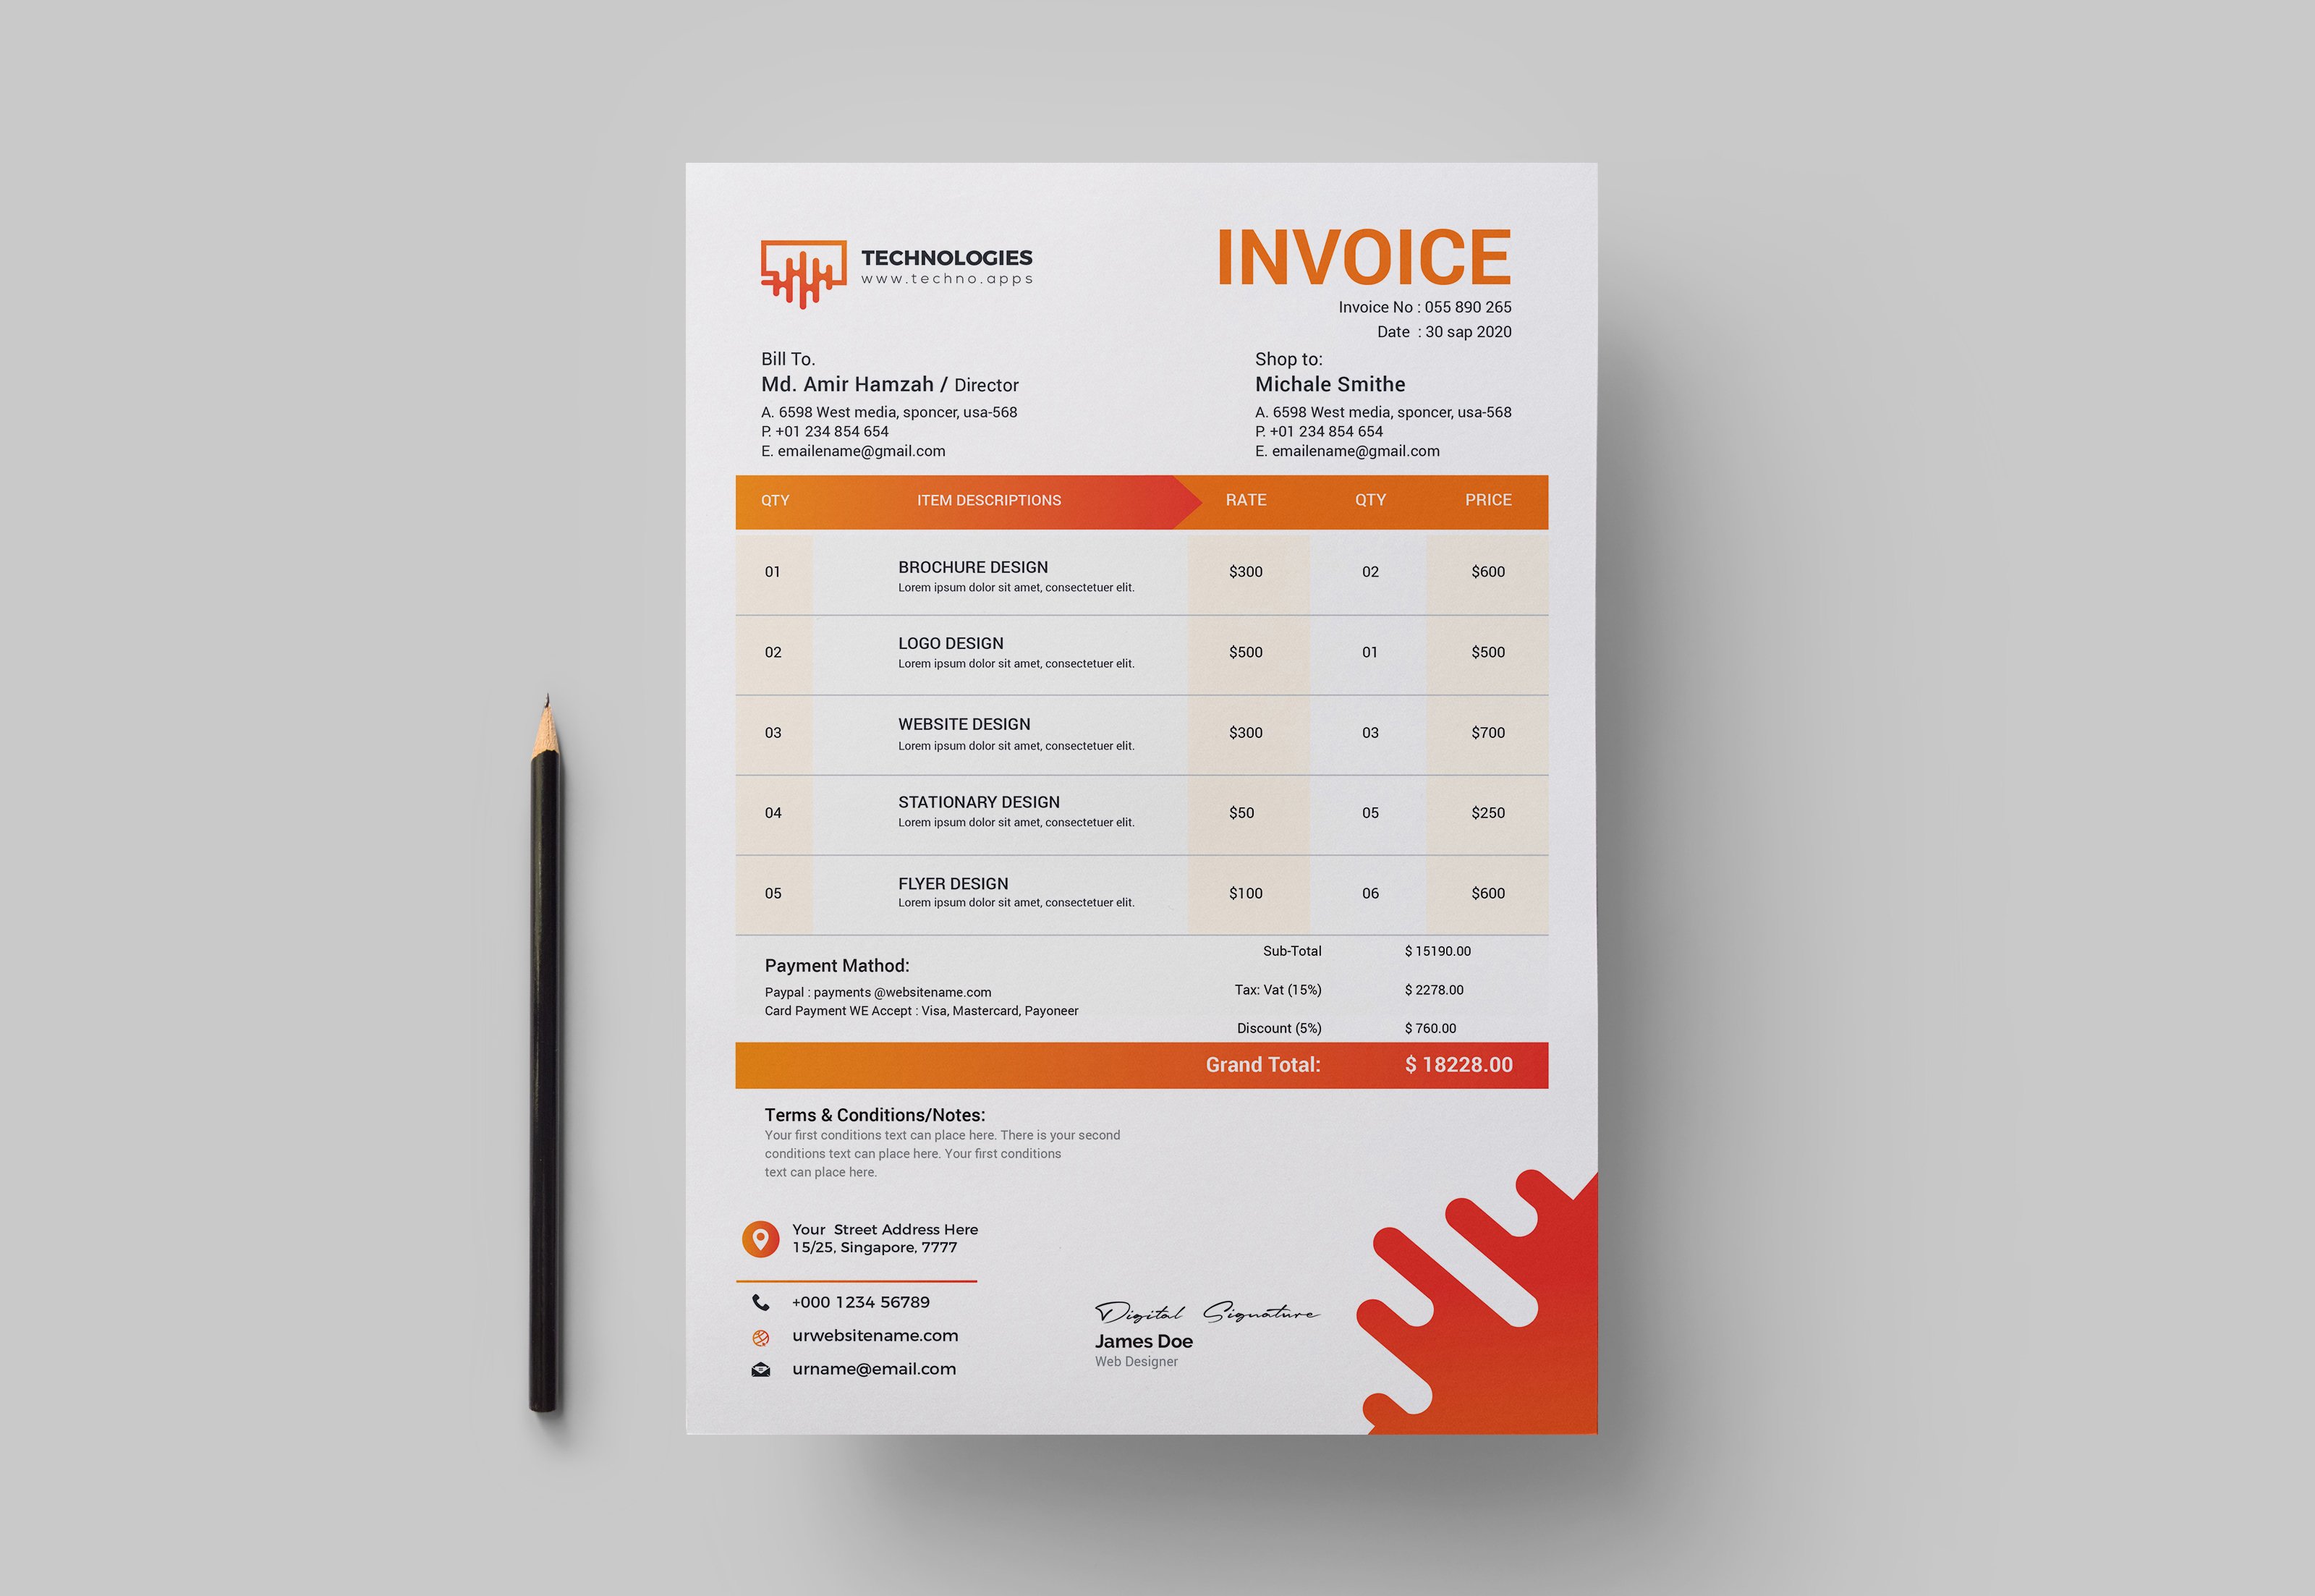 Invoice preview image.